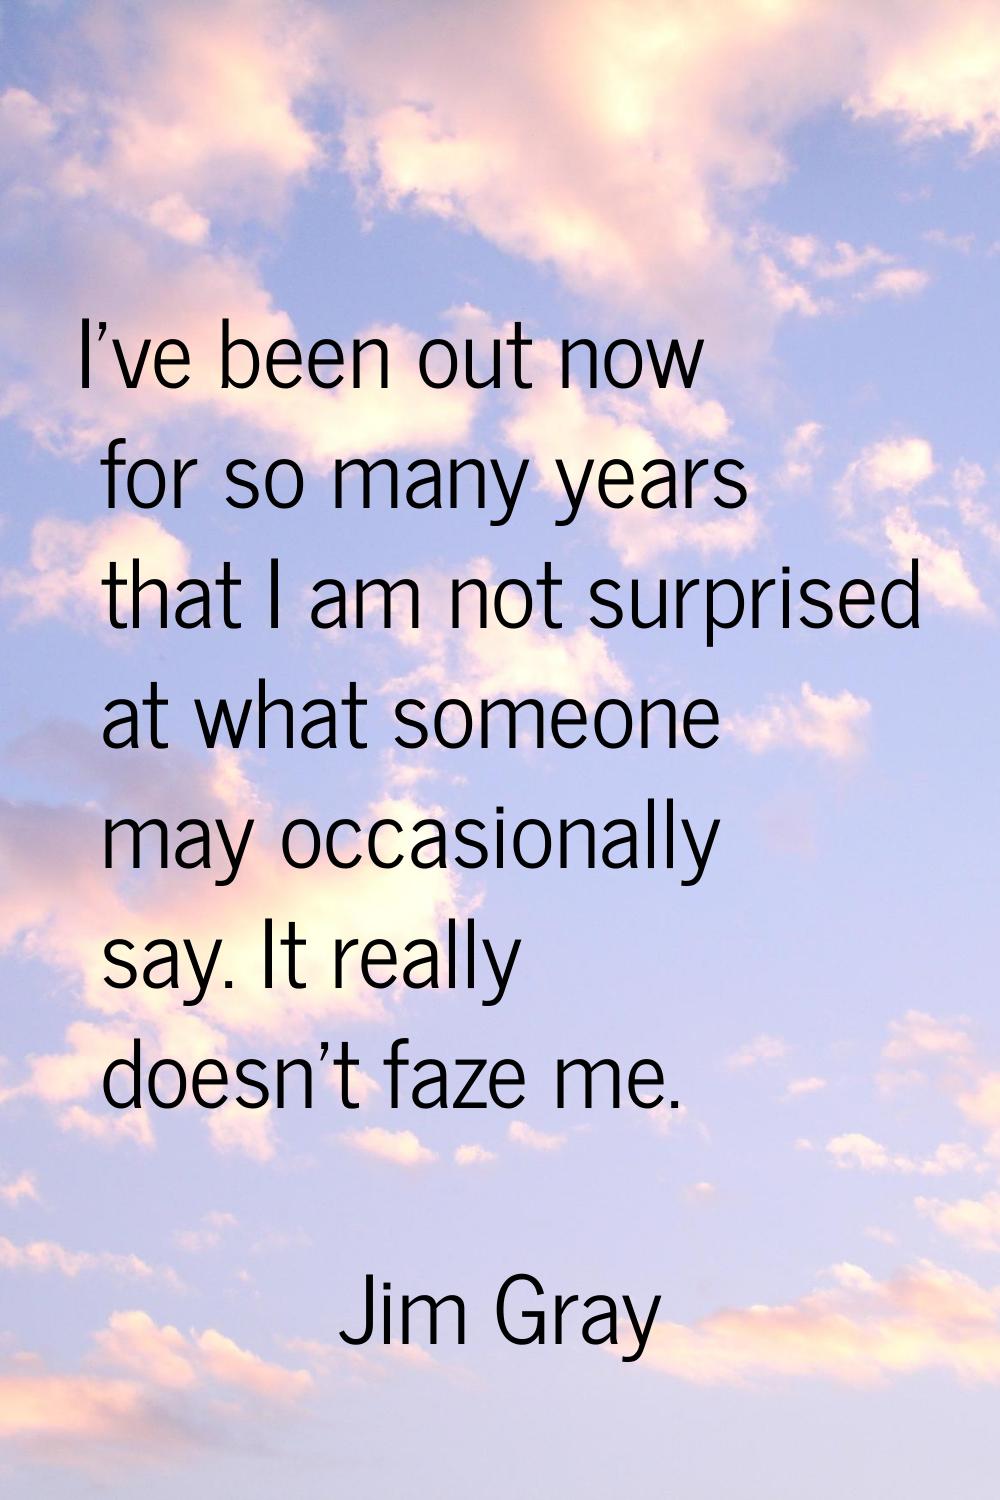 I've been out now for so many years that I am not surprised at what someone may occasionally say. I